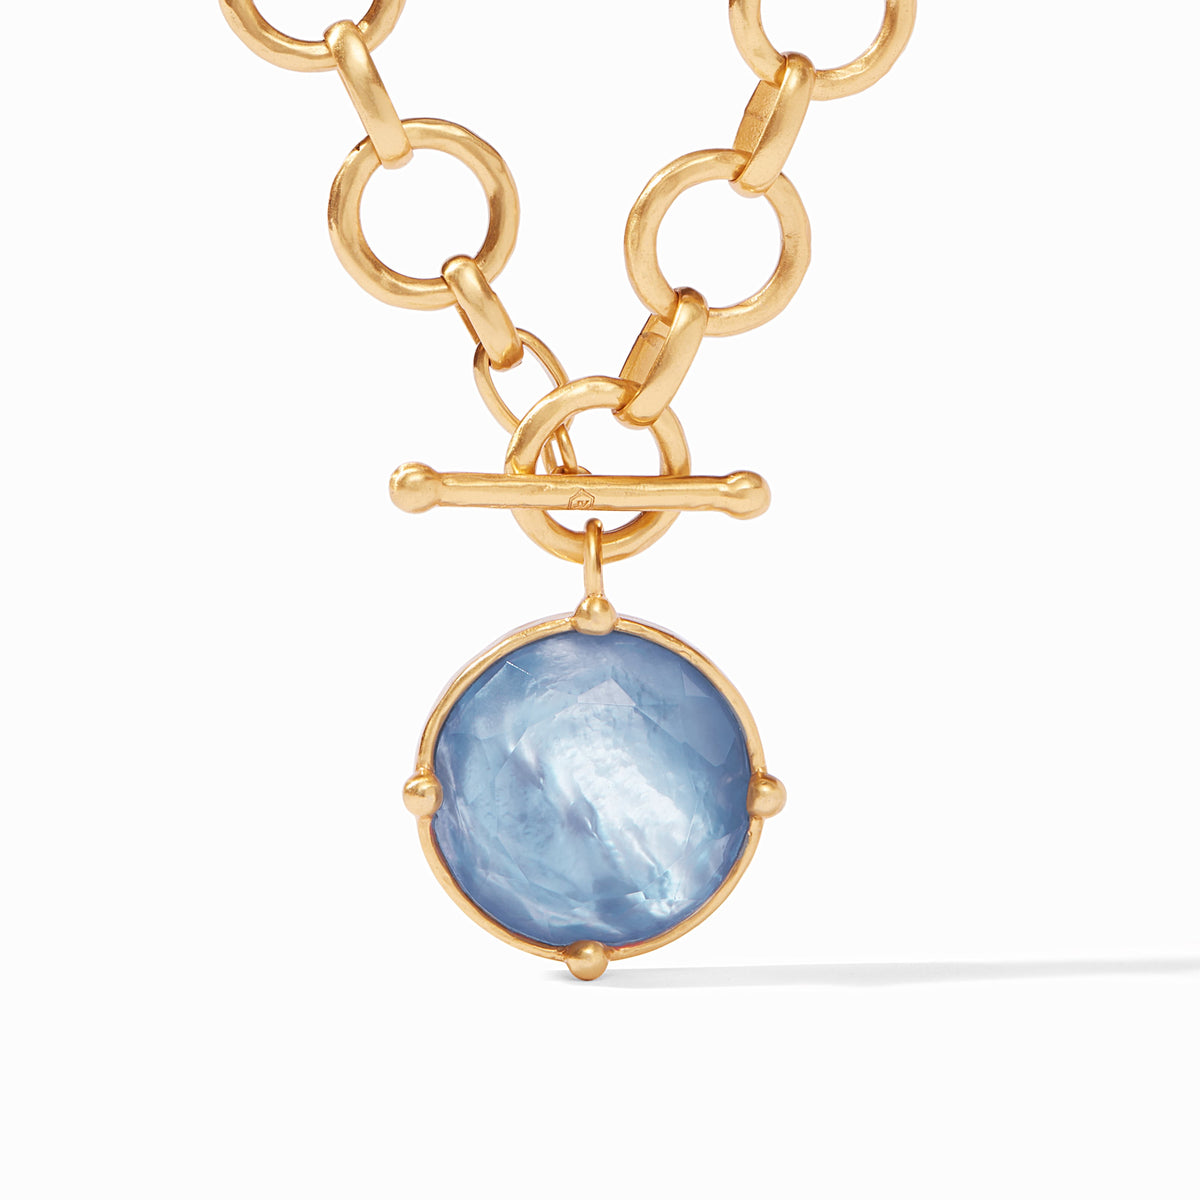 Iridescent Chalcedony Blue, classics, welcome, catalina collection, into the blue, travel jewels palm beach, classics in chalcedony blue, fab five, best sellers, new chalcedony blue, back in stock, long weekend jewels, 